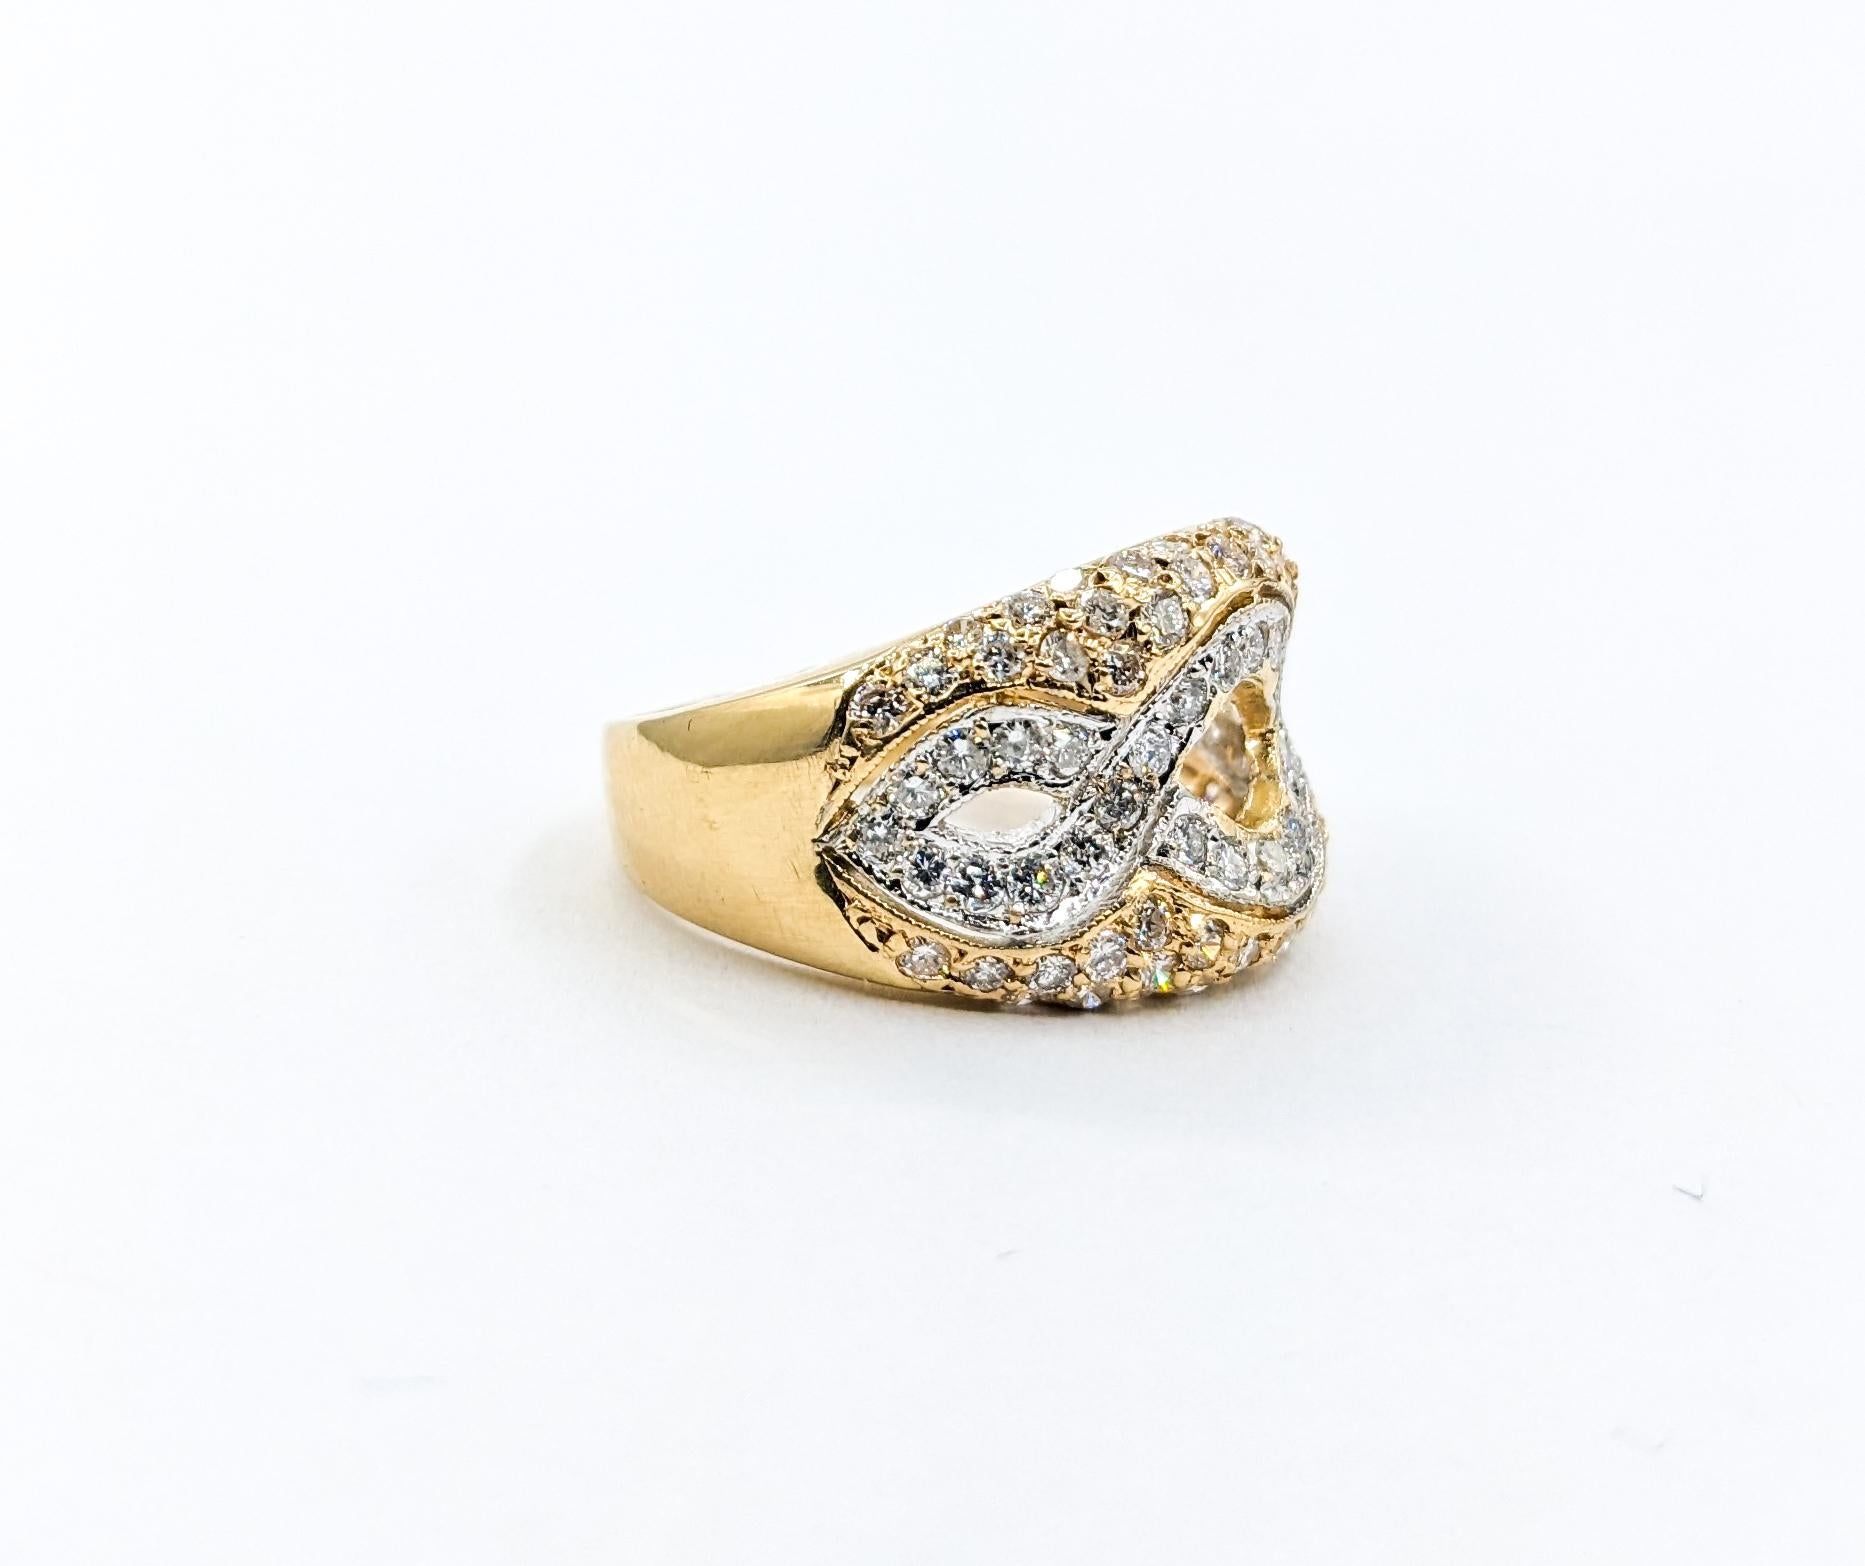 1ctw Diamond Ring In Two-Tone Gold


Discover the allure of our exquisite ring, masterfully crafted in a stunning blend of 18kt yellow and white gold. This piece is adorned with 1.00ctw of luminous diamonds, boasting SI2-I1 clarity and H-I color,